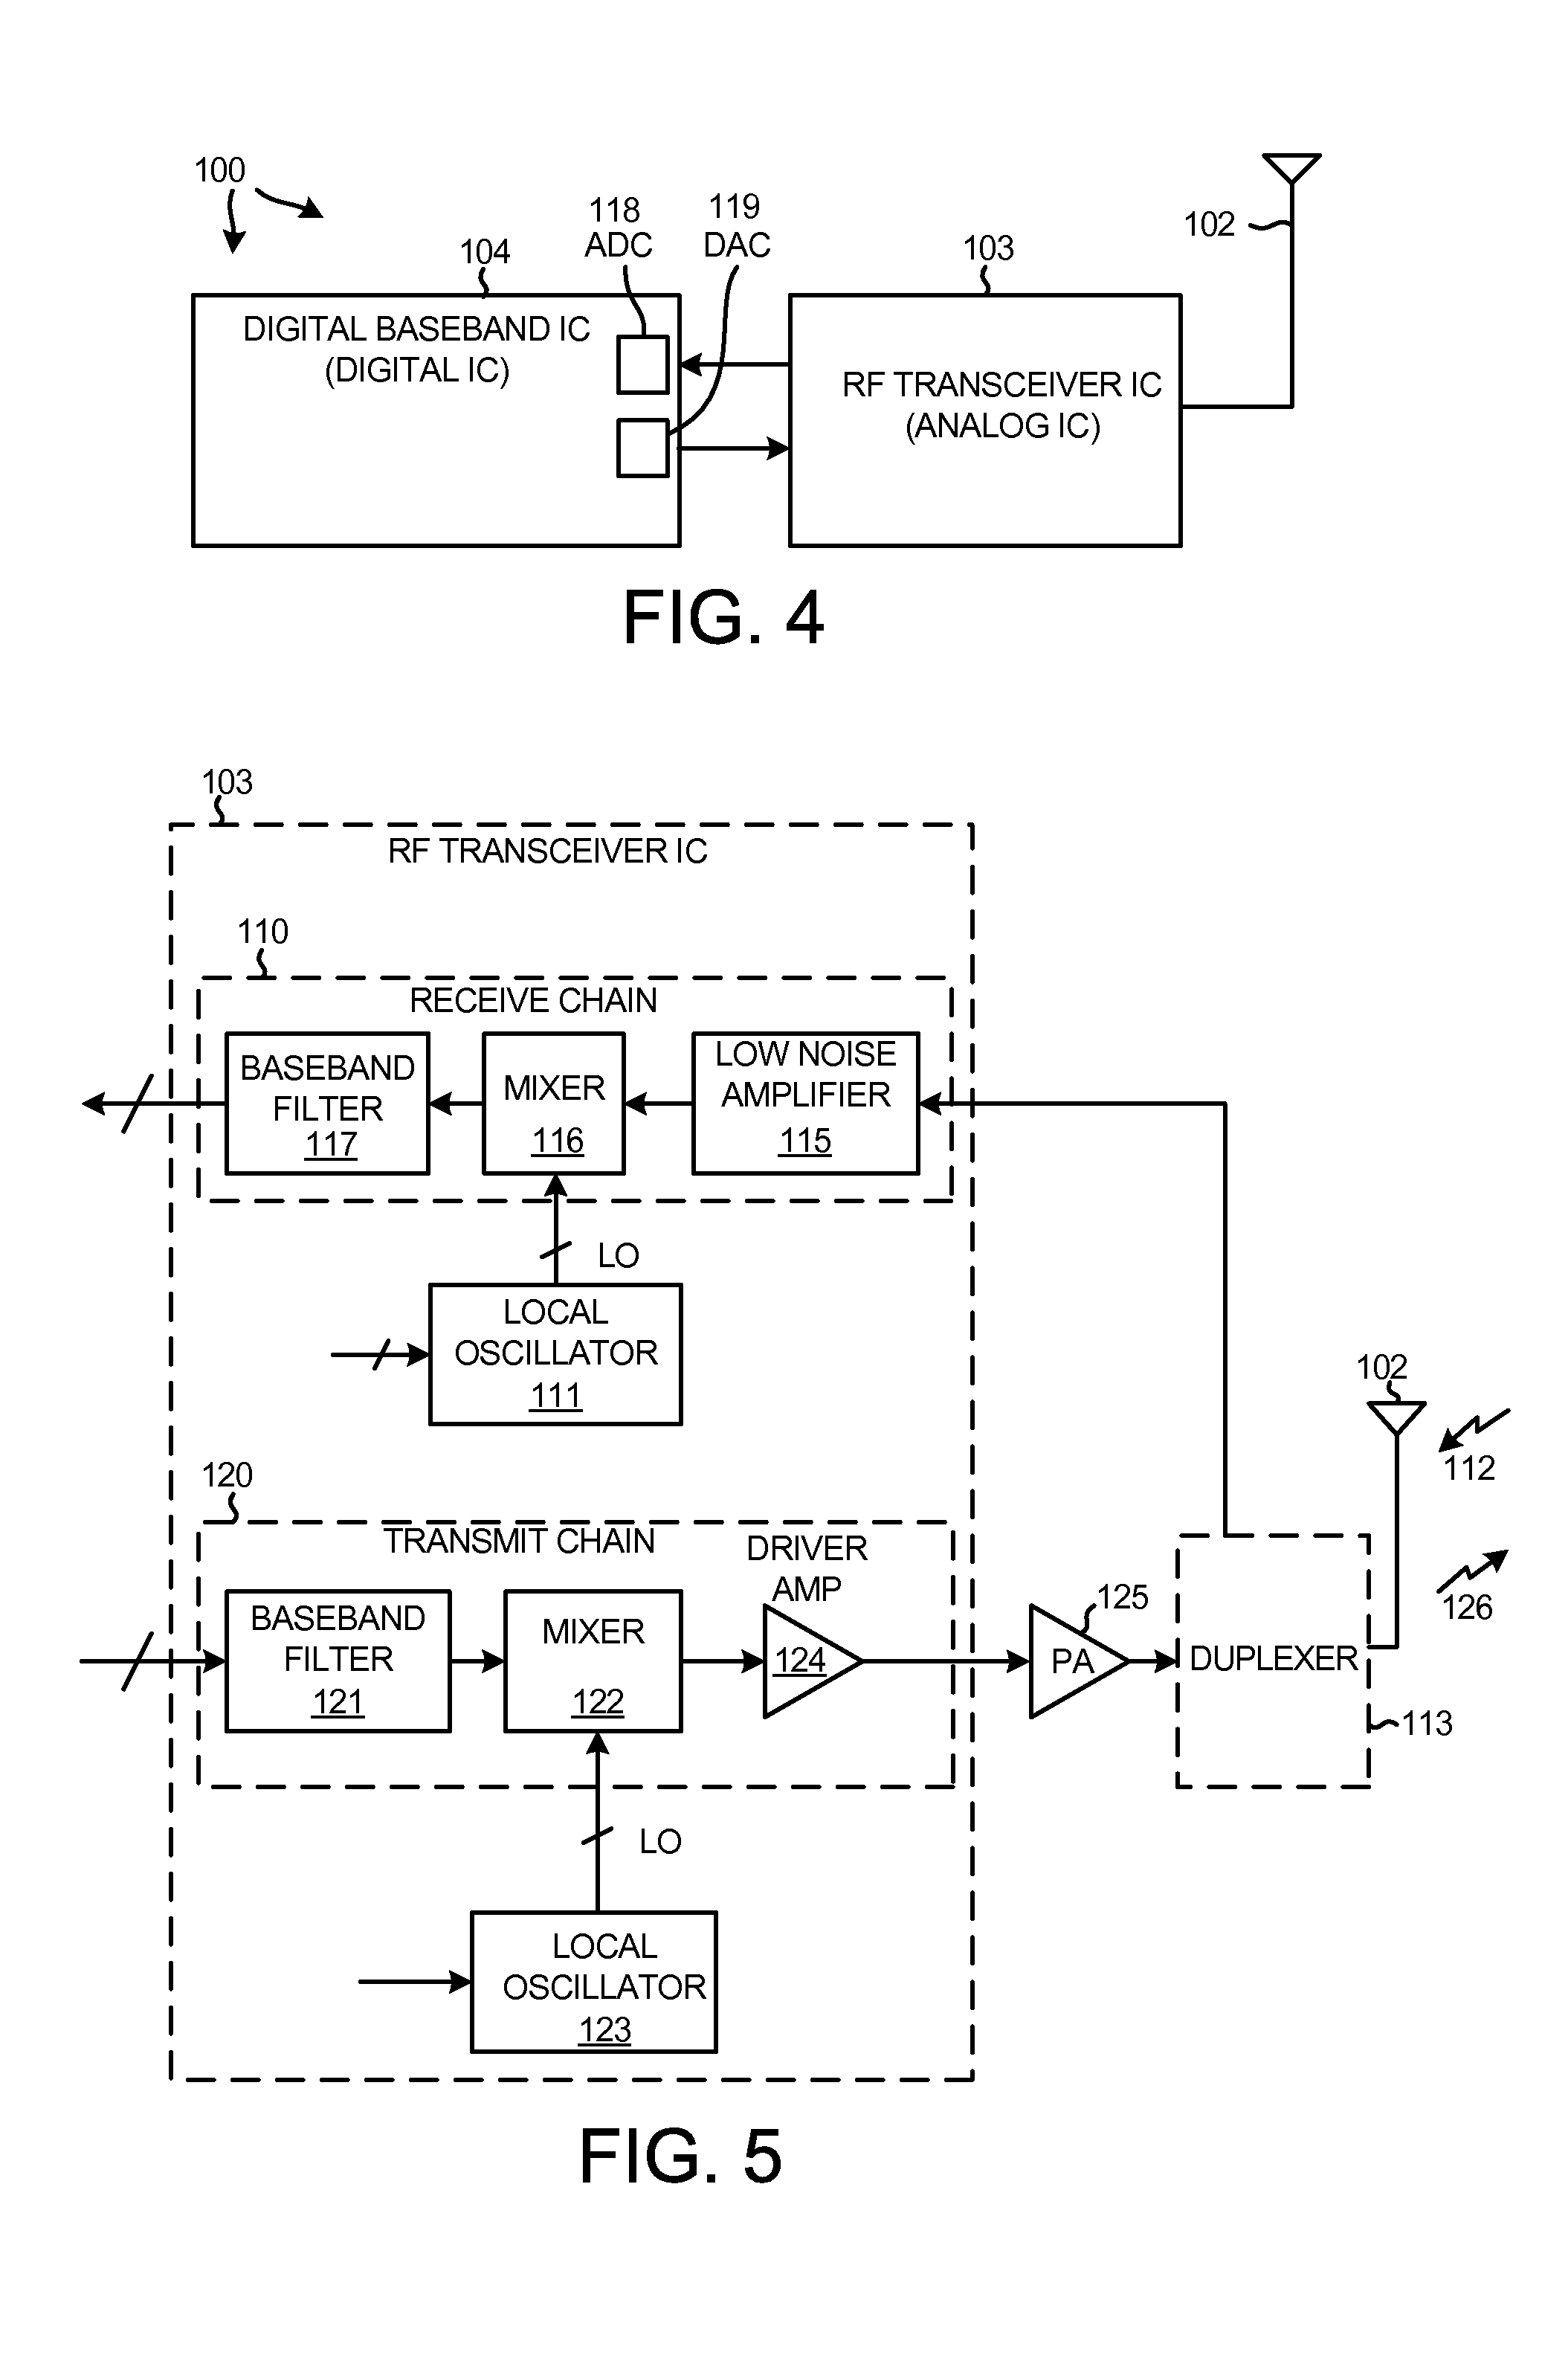 High q transformer disposed at least partly in a non-semiconductor substrate